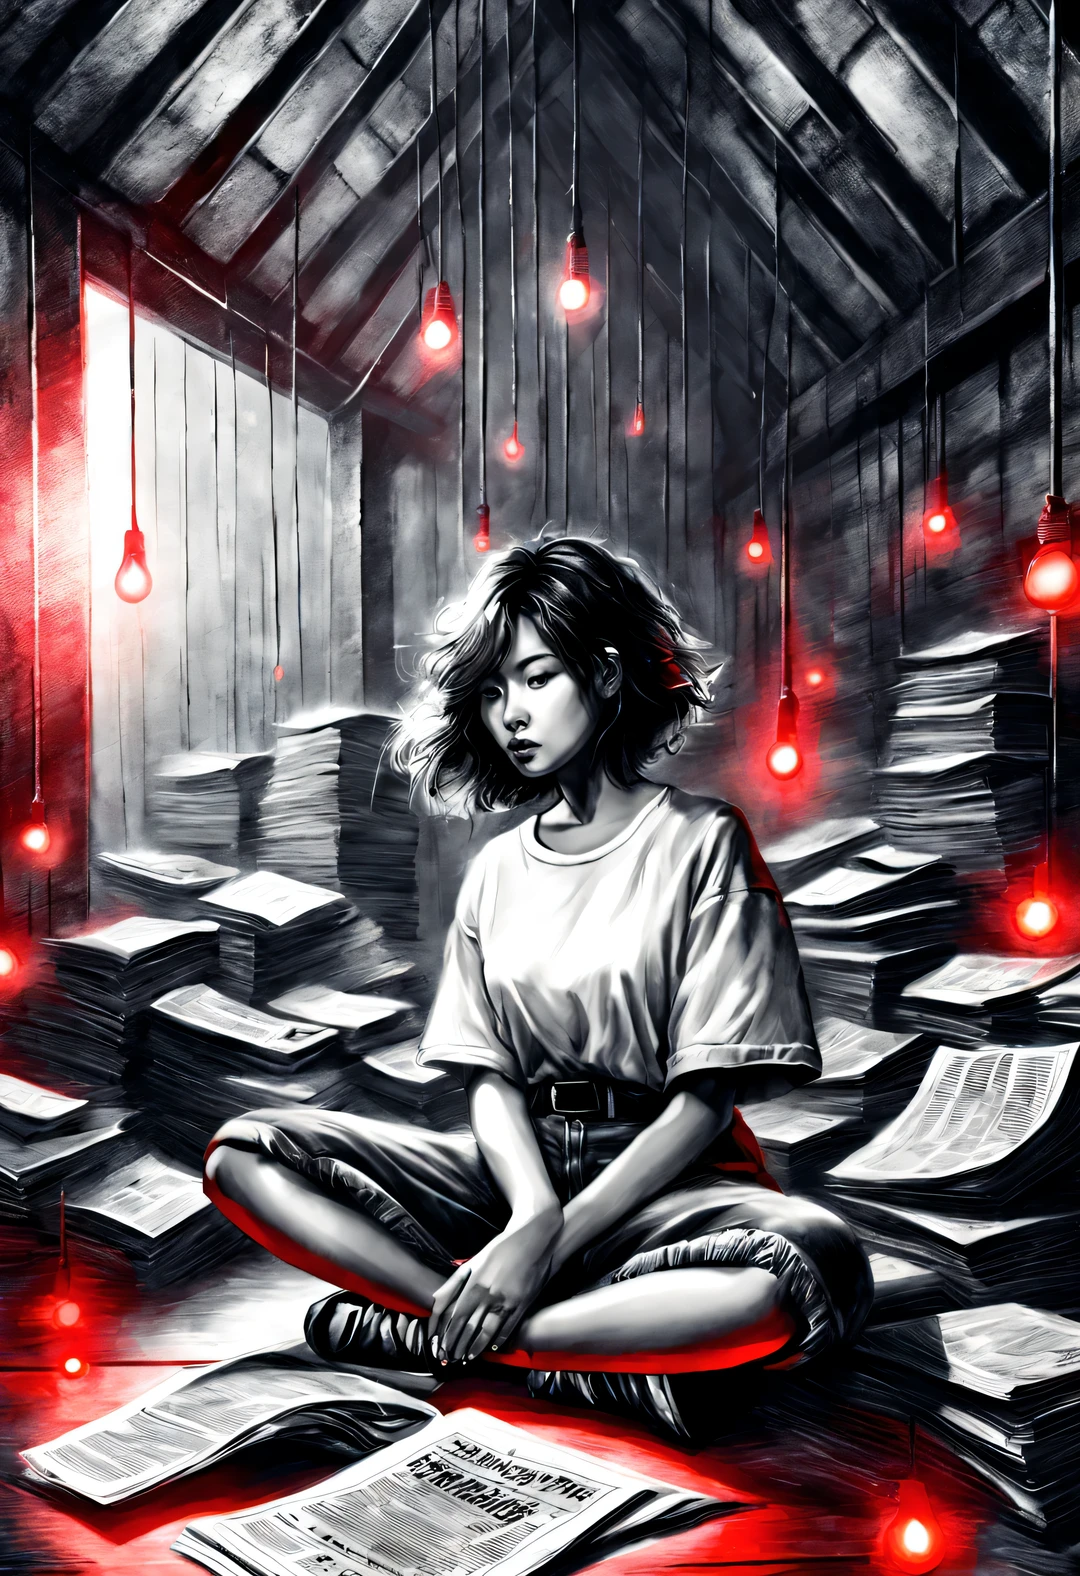 (Graphite painting), (A beautiful charming girl sits cross-legged on a mountain of old newspapers in the basement), (She is wearing a white crew neck shirt and jeans), A young and wild Asian face, Slightly mixed face shape, (Slightly square chin: 0.4), (Messy and too long, Curly short hair), decadent and lazy, (perfect face), Slightly narrowed slender eyes, sports shoes, (Industrial lights on the roof emit a dim, weak red light: 1.34),
background: The basement is filled with old newspapers and books, Lots of old briefcases and glasses flying around, The old wall is dilapidated, Industrial style retro shabby,
90's anime style, Bold silhouettes, Graphic arts, line art, black and white, line art with pen pressure, Pen pressure sketch, Calligraphy pen with pen pressure, G pen style，With pen pressure, Hand drawn thick lines, high contrast, IG model,